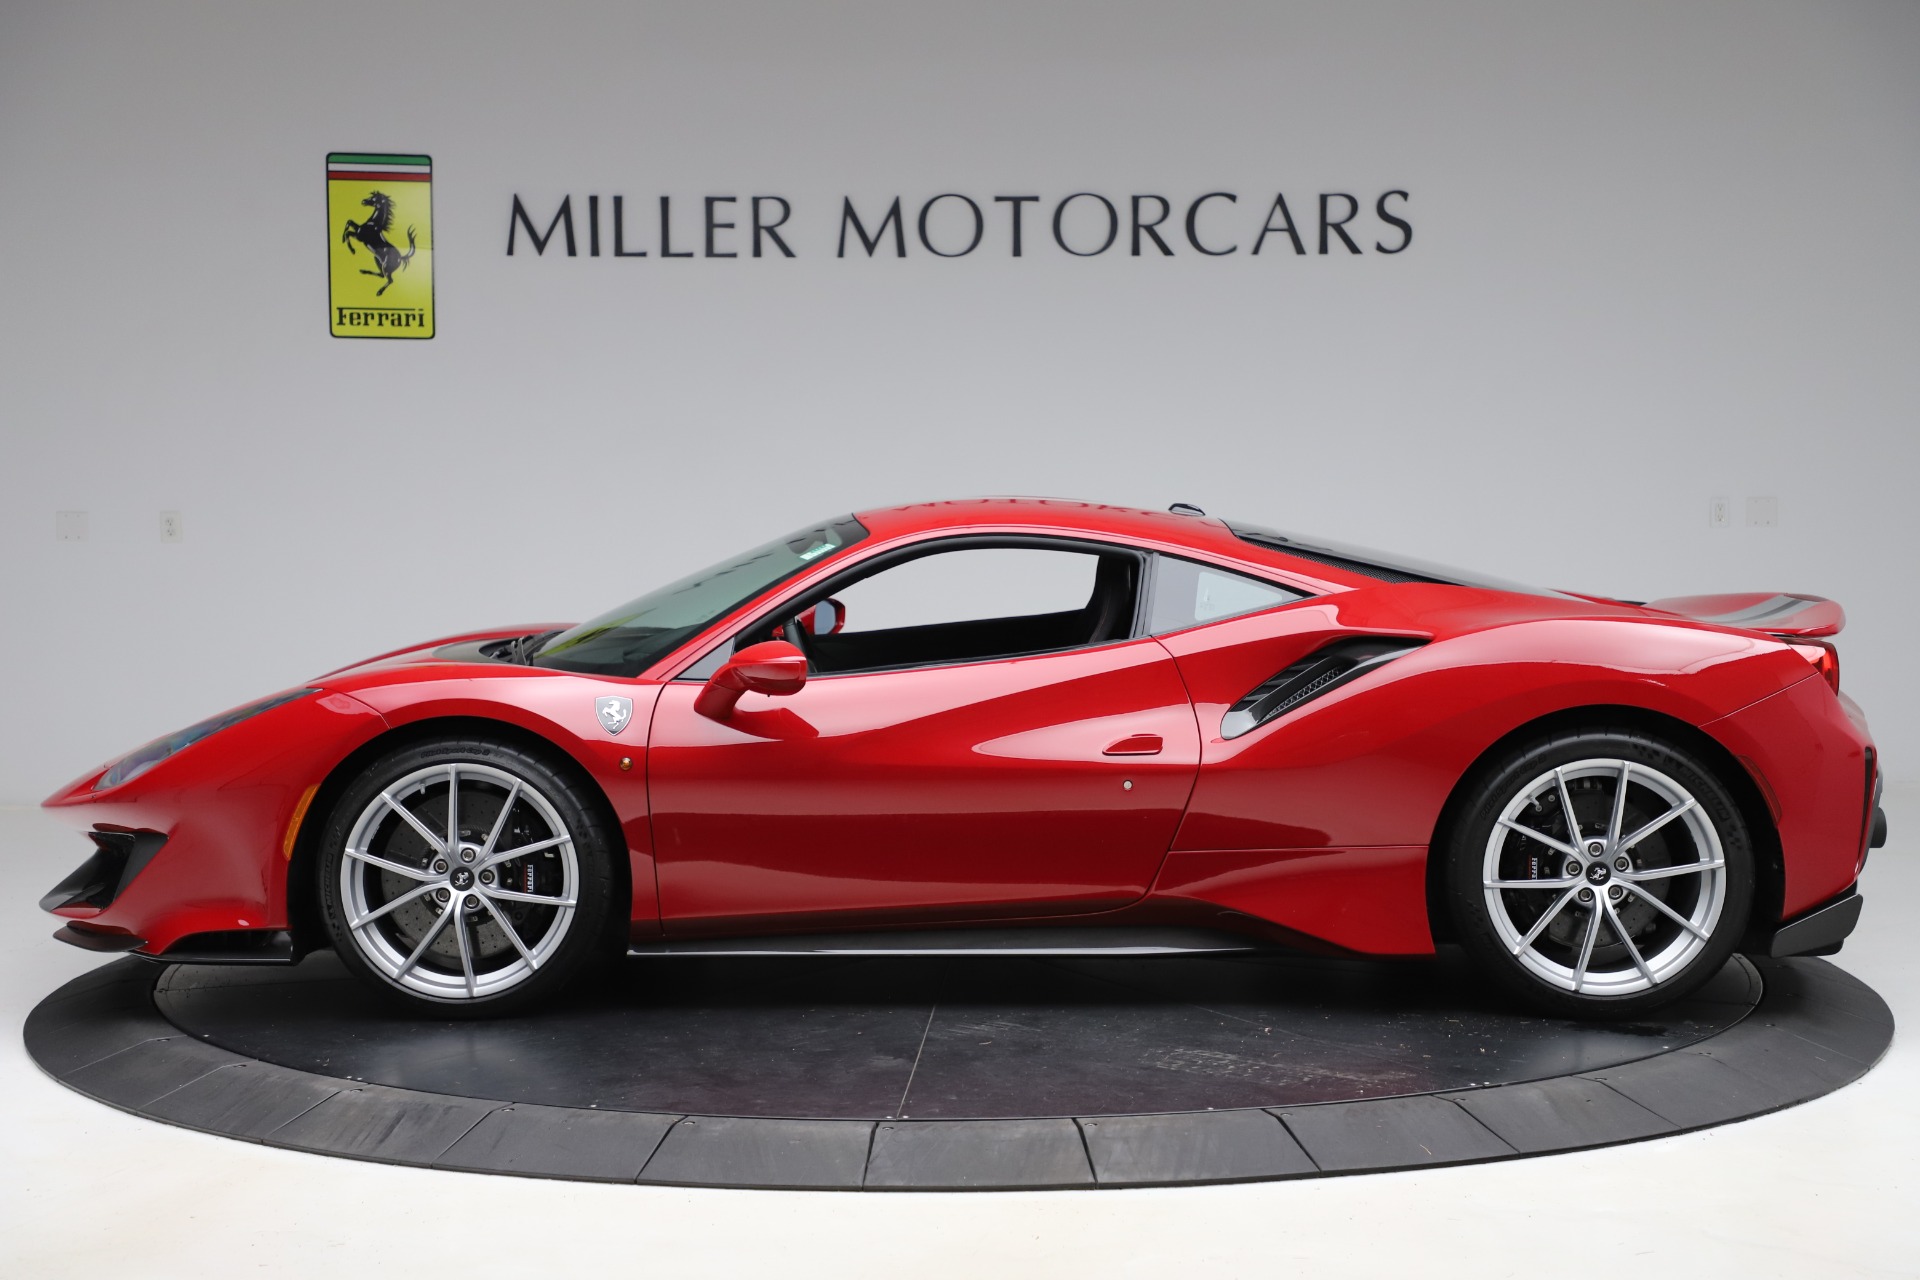 2020 Ferrari 488 Prices, Reviews, and Photos - MotorTrend